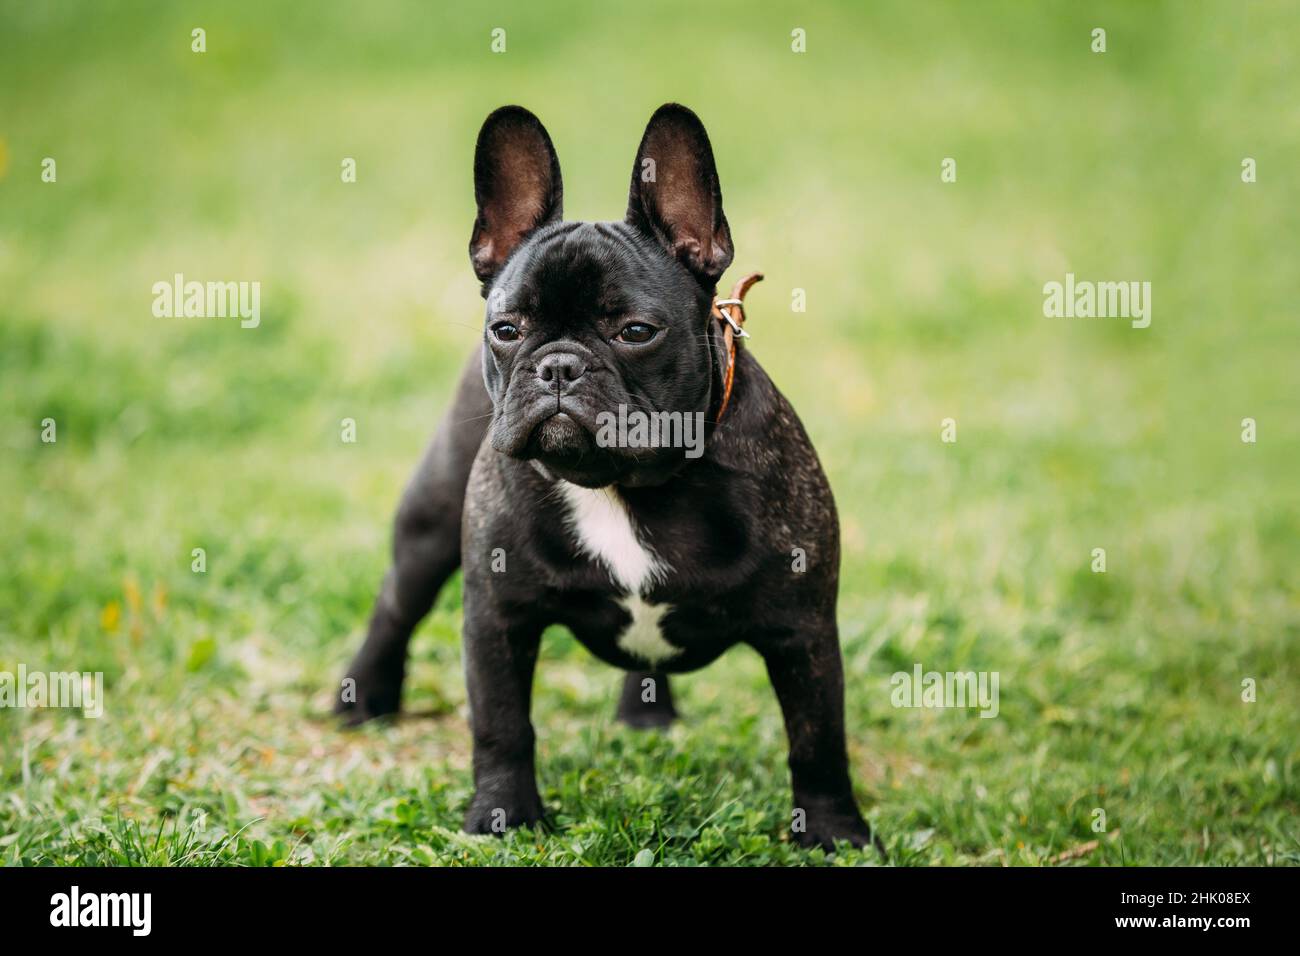 Beautiful Young Black French Bulldog Puppy Dog In Green Grass, In Park ...